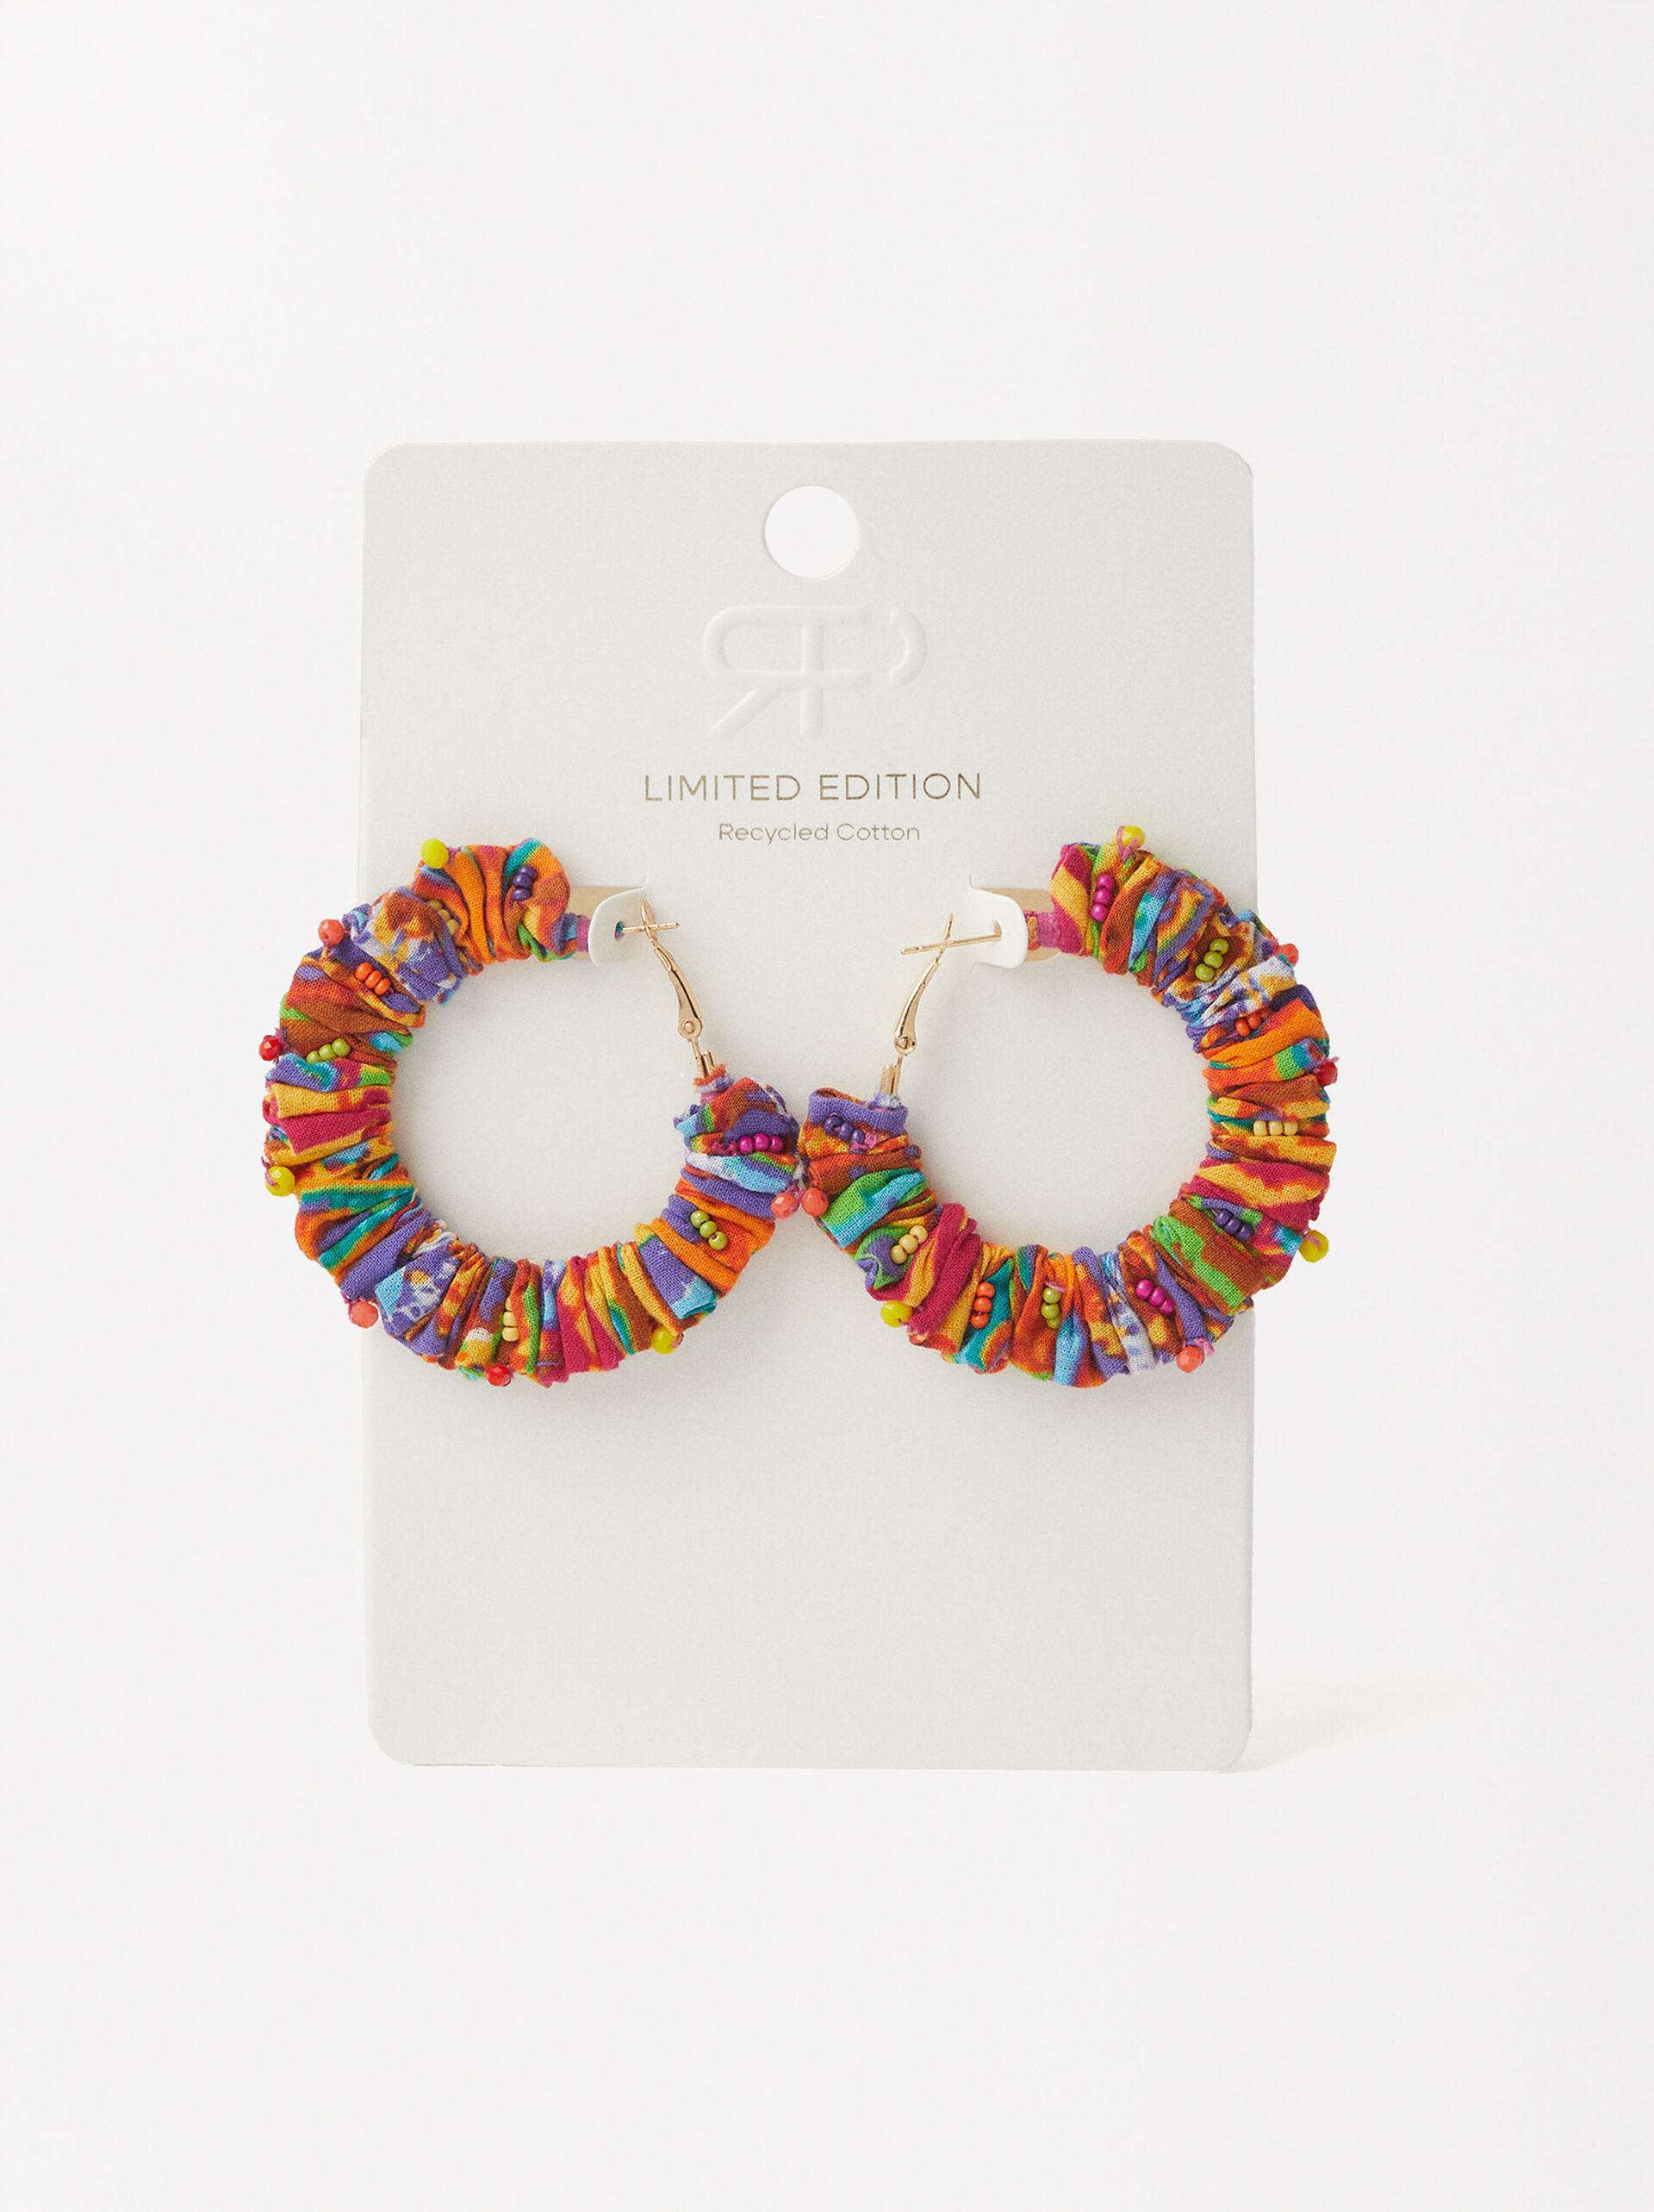 Recycled Cotton Hoop Earrings - Limited Edition image number 2.0